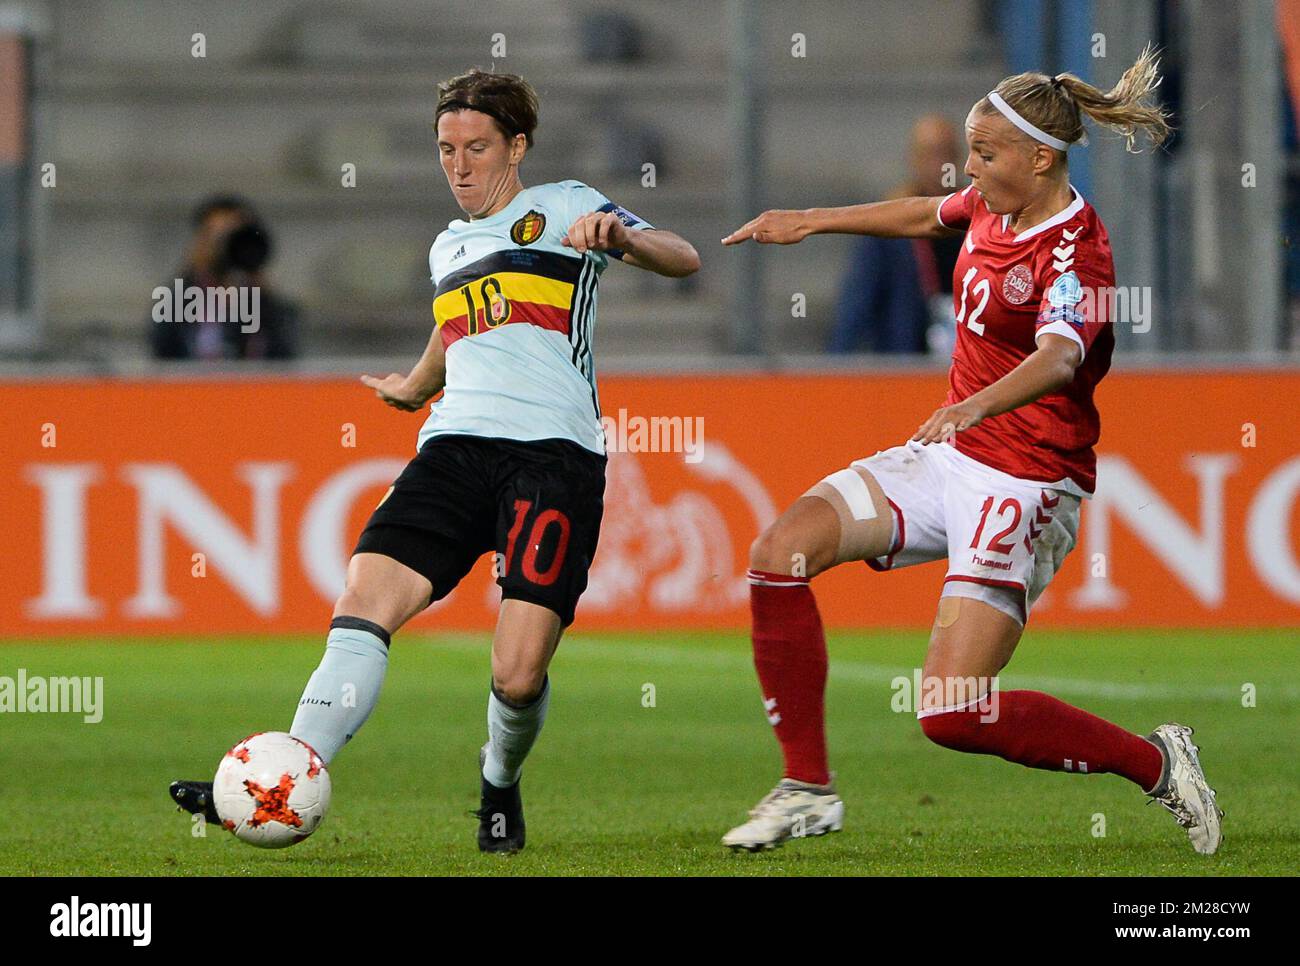 Belgium's Aline Zeler and Denmark's Stine Larsen fight for the ball during a soccer game between Belgian national women's soccer team Red Flames and Denmark, the first game in group A in the group stage of the Women's European Championship 2017 in the Netherlands, Sunday 16 July 2017 in Rheden, The Netherlands. BELGA PHOTO DAVID CATRY Stock Photo